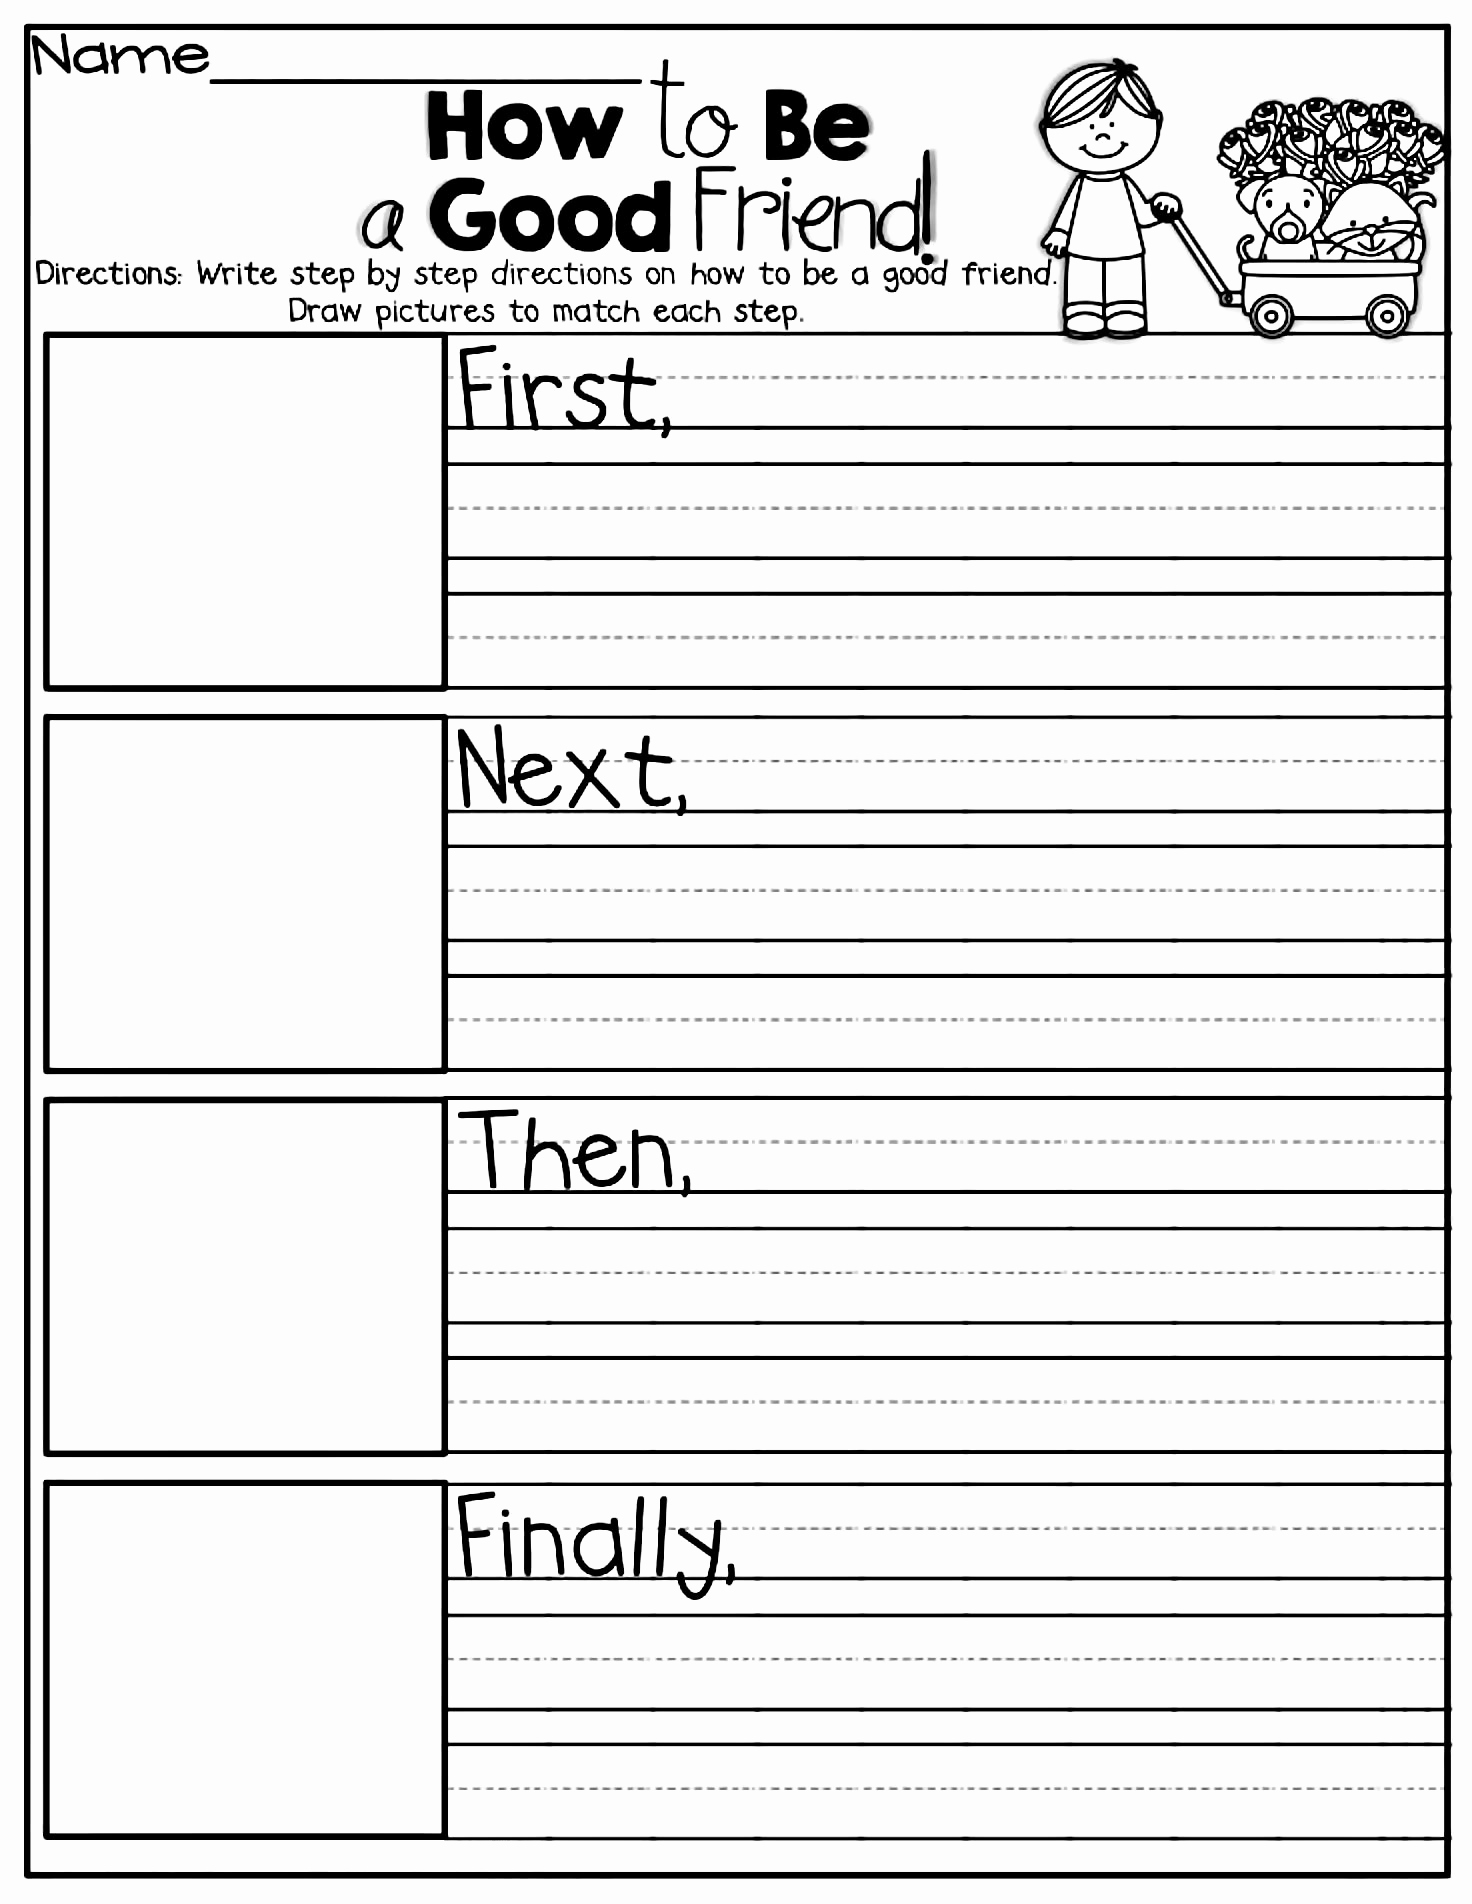 Worksheets for First Grade Writing Unique 12 Good Examples 1st Grade Worksheets Free Download